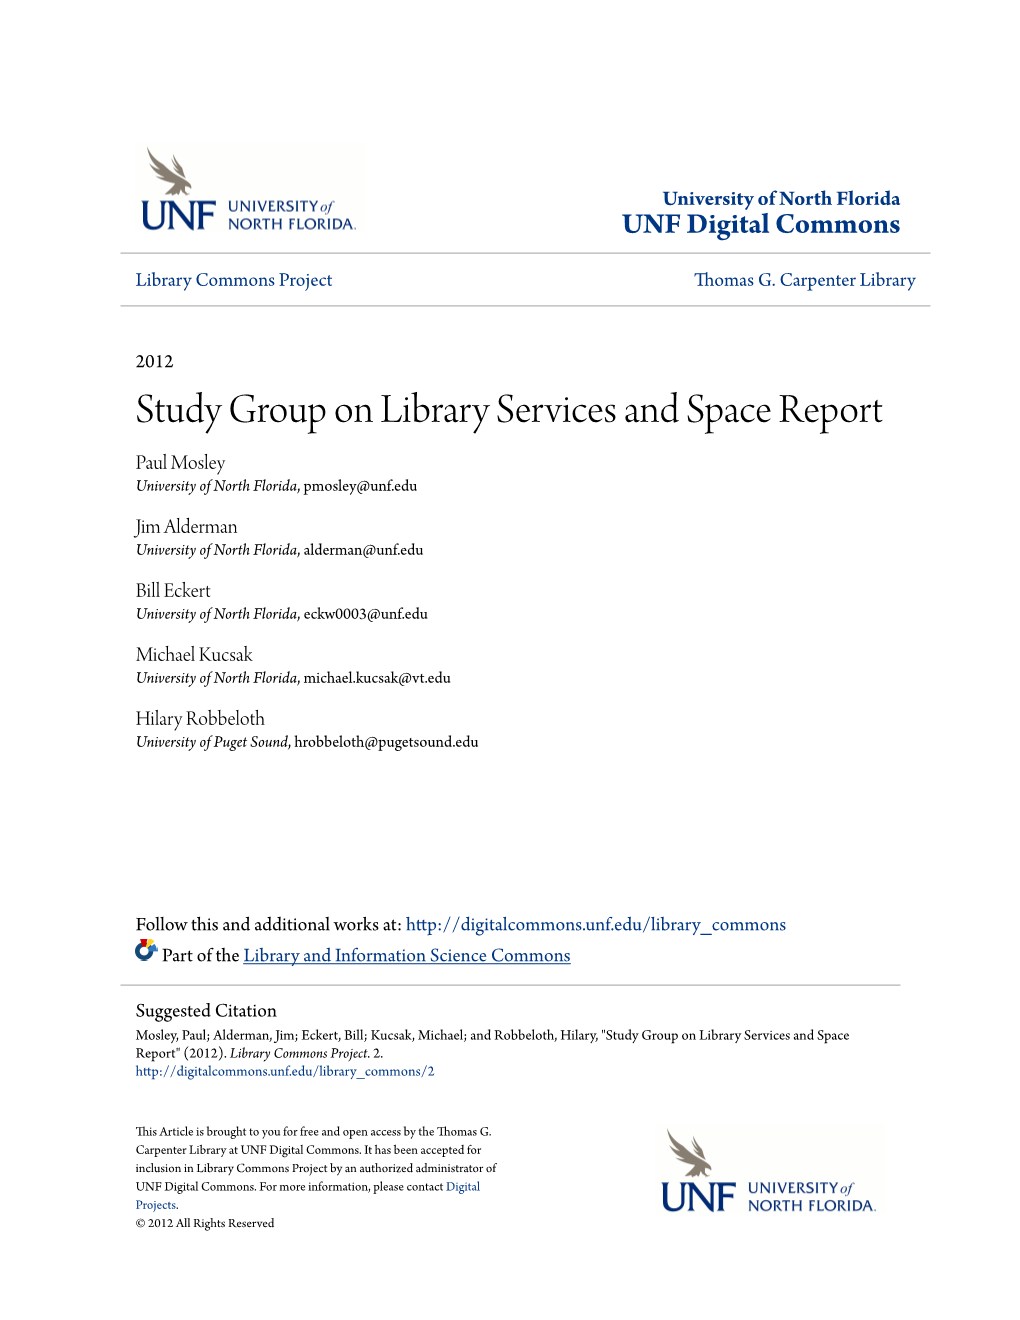 Study Group on Library Services and Space Report Paul Mosley University of North Florida, Pmosley@Unf.Edu